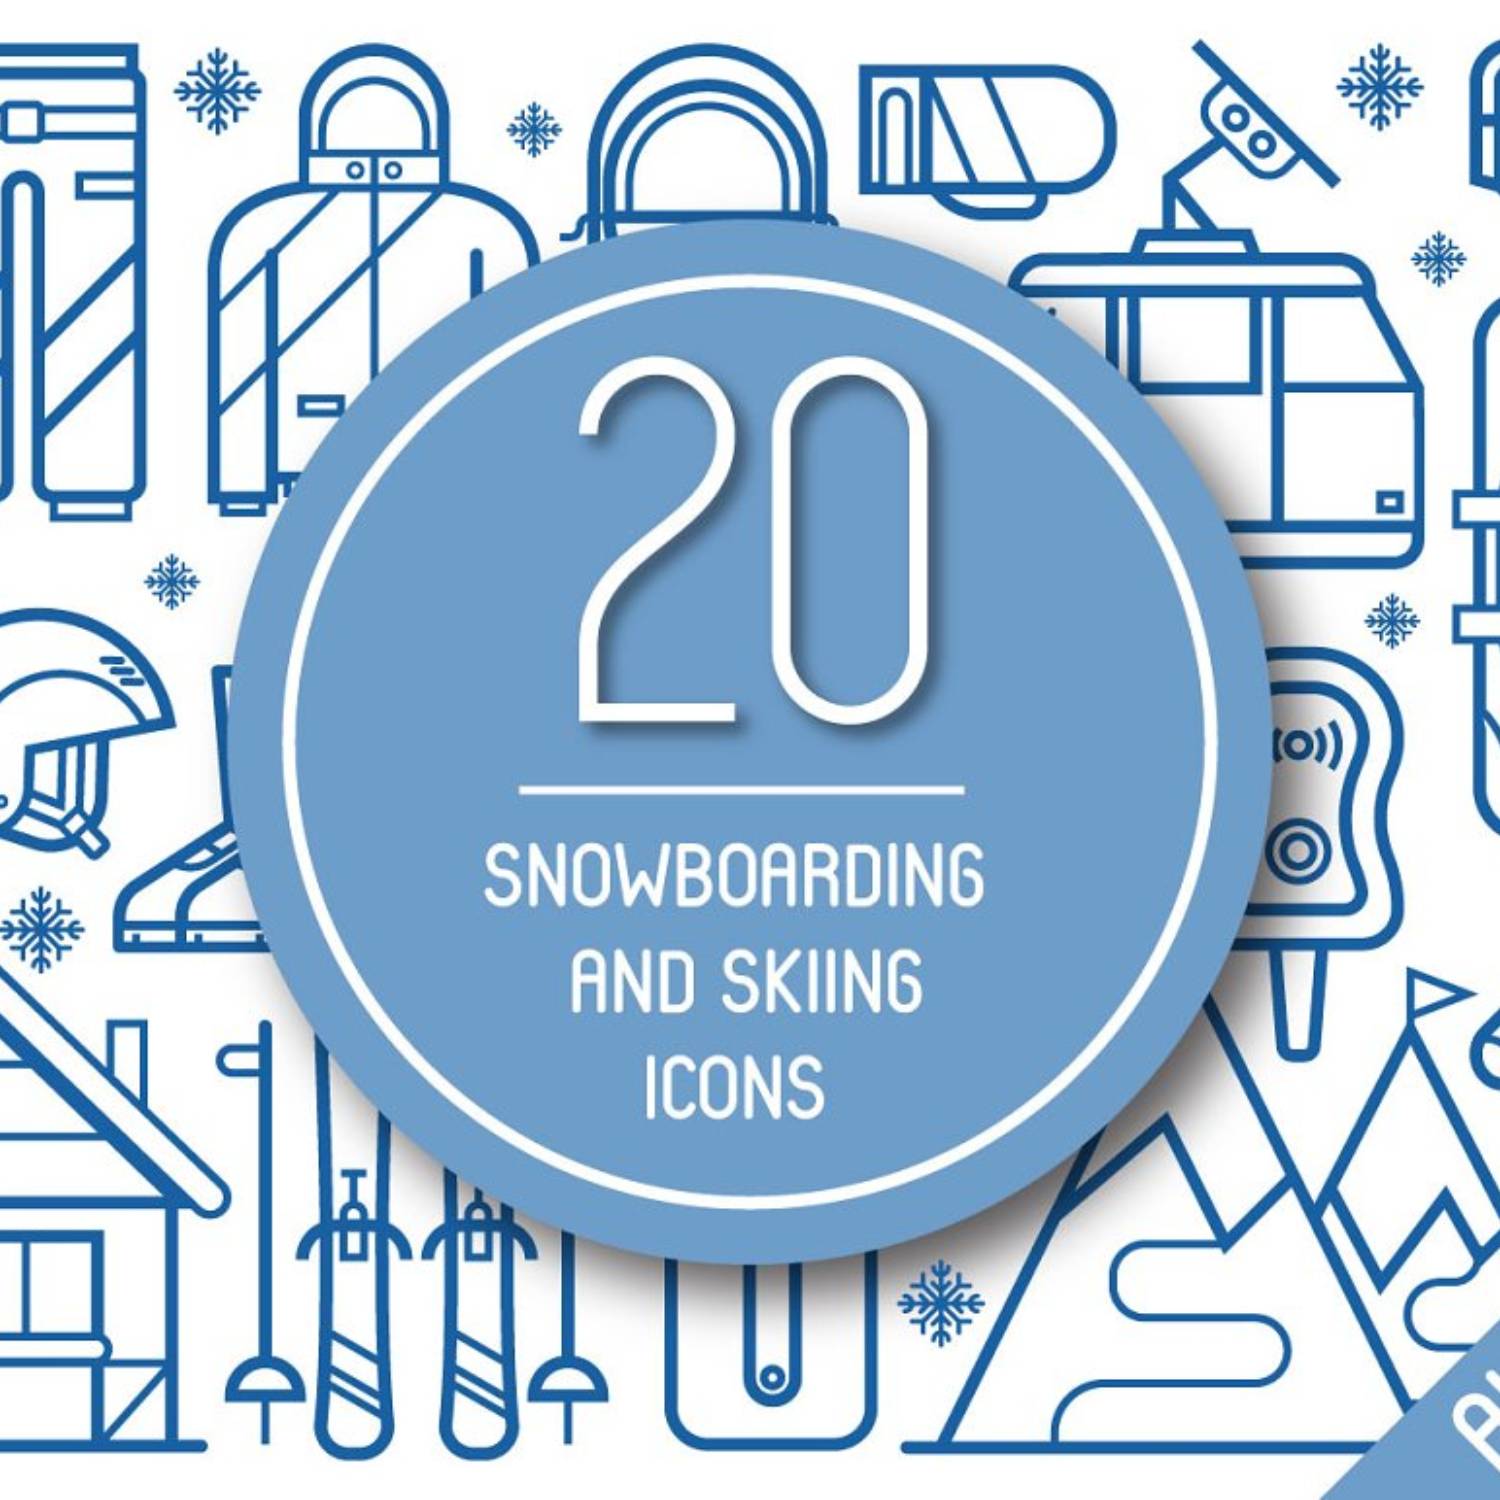 Snowboard And Ski Equipment Icons Main Cover.